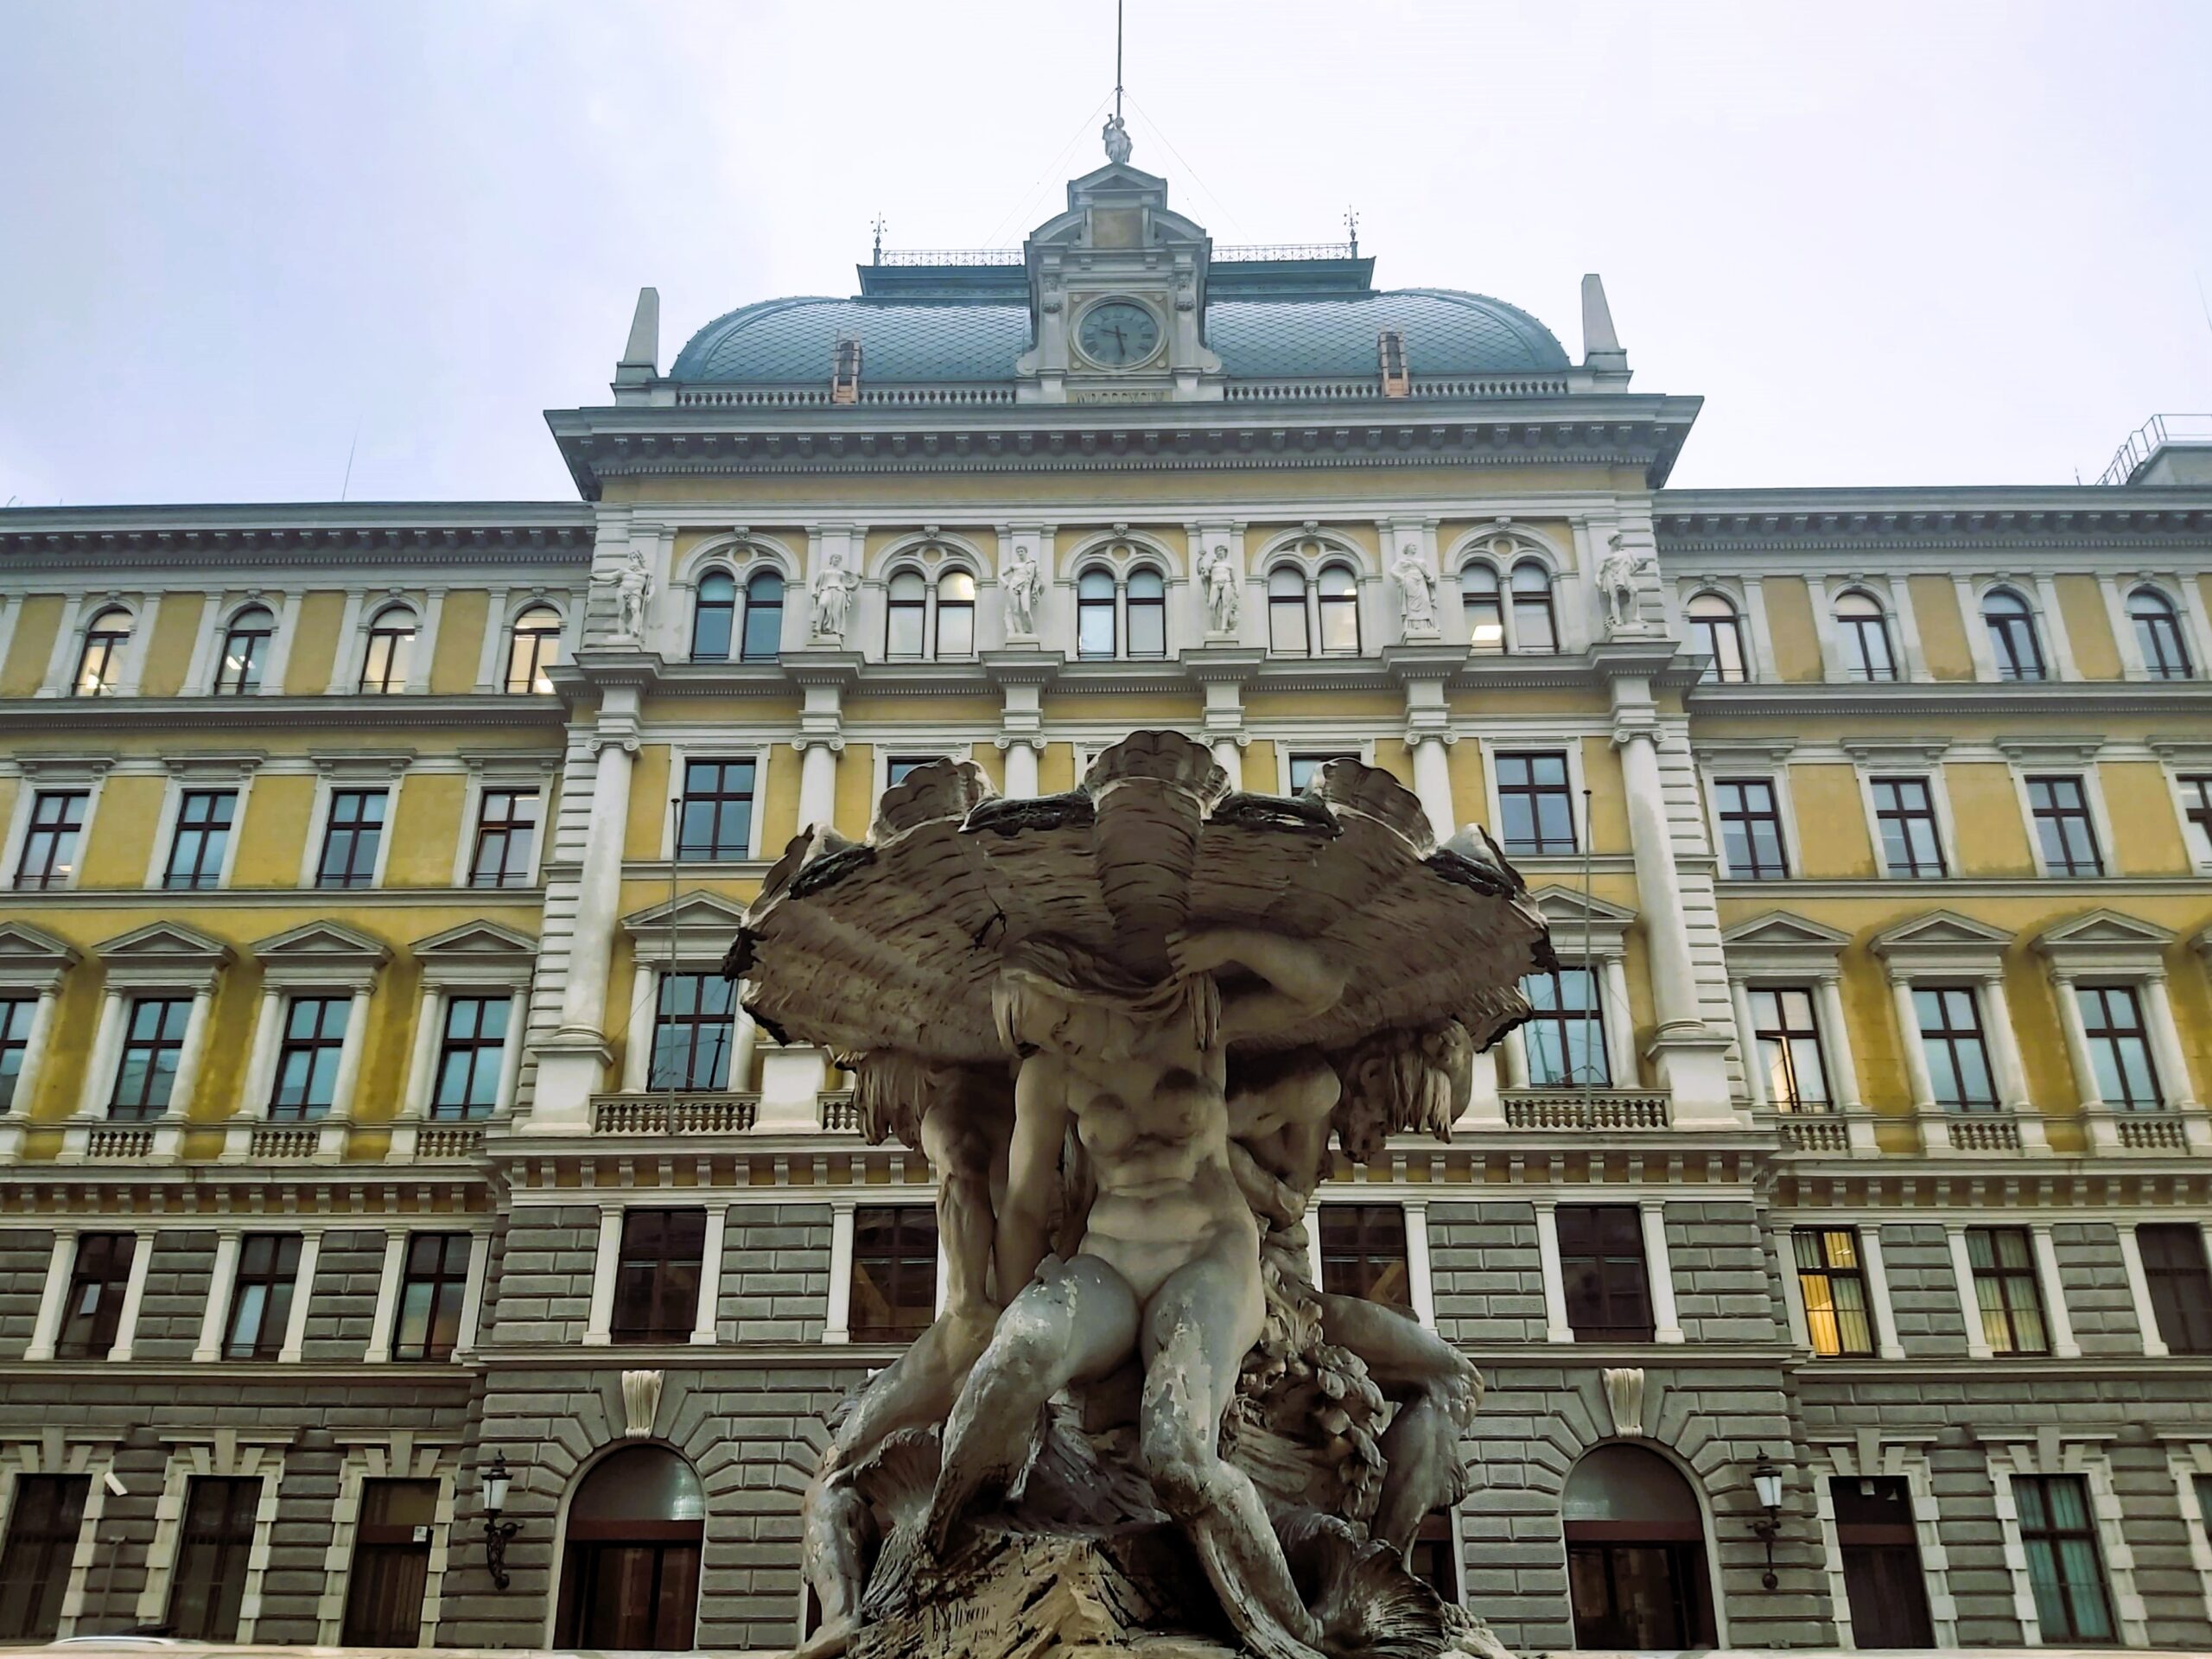 A naked woman statue on a fountain in front of a yellow building in Trieste, Italy